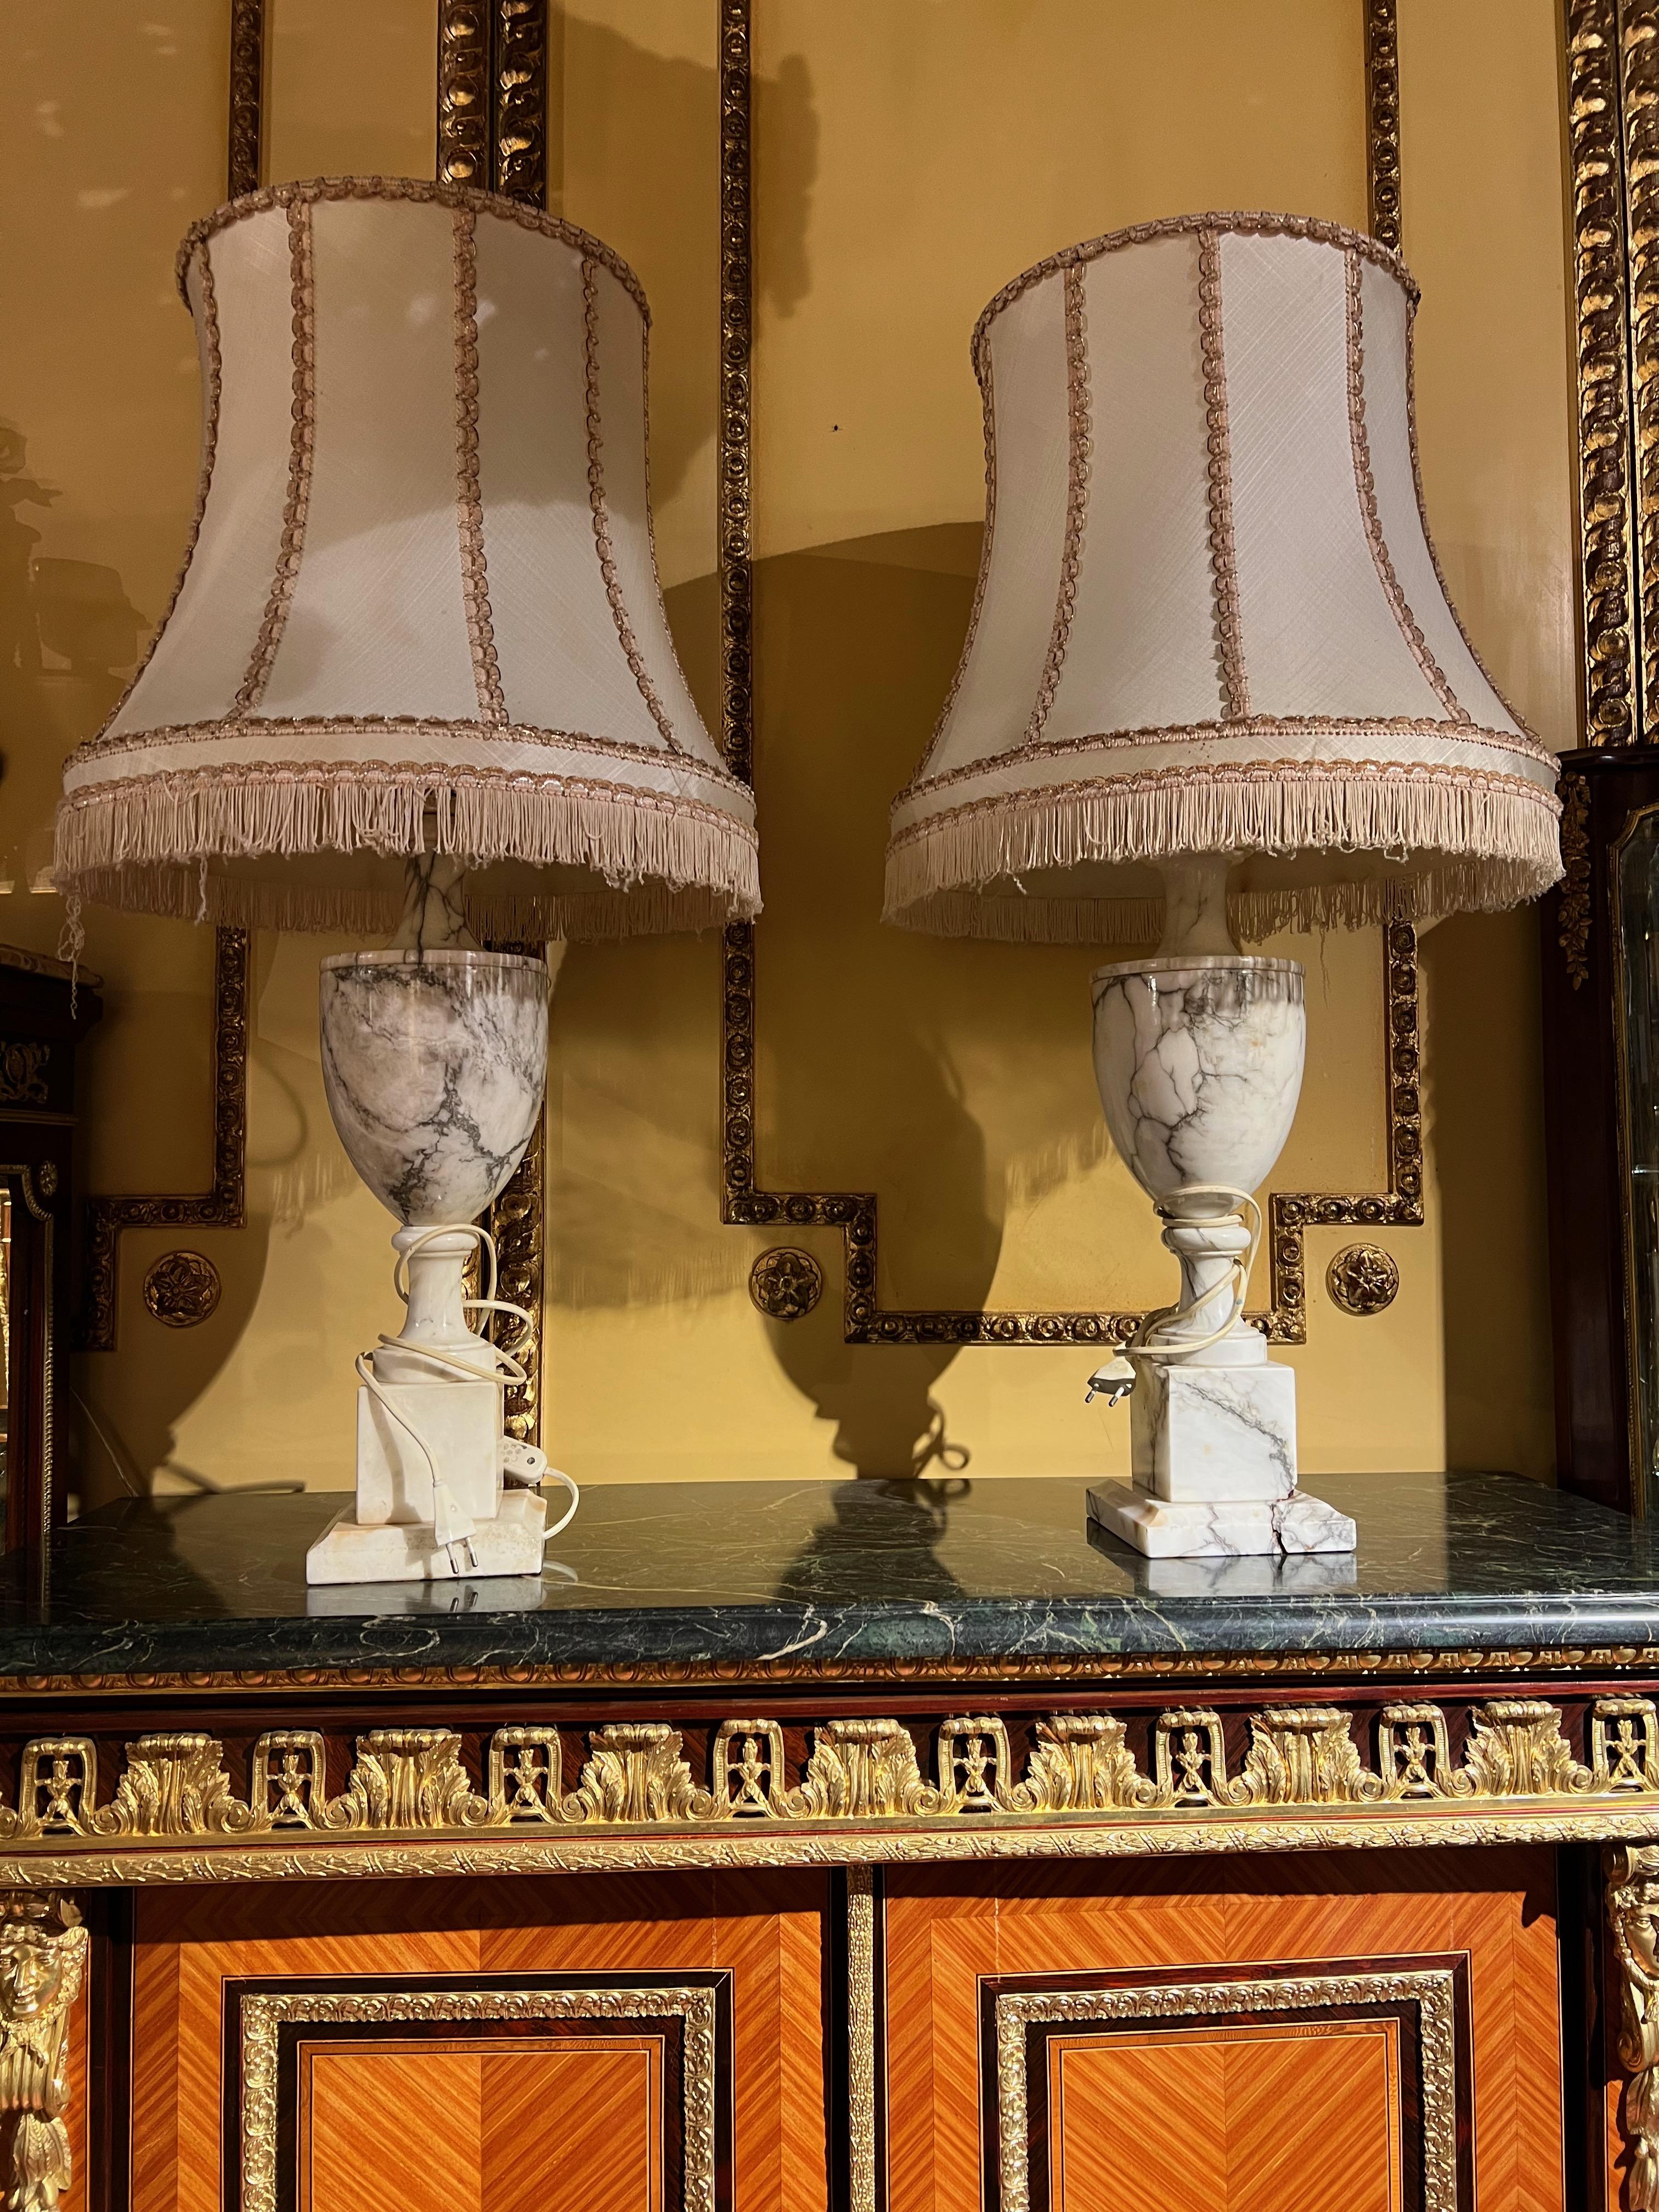 Pair of Classicism marble table lamps with white Lampshade.
The lampshades have some damages as too see on the pictures.
Measurements without lampshades.
Width: 16 cm
Height: 57 cm.